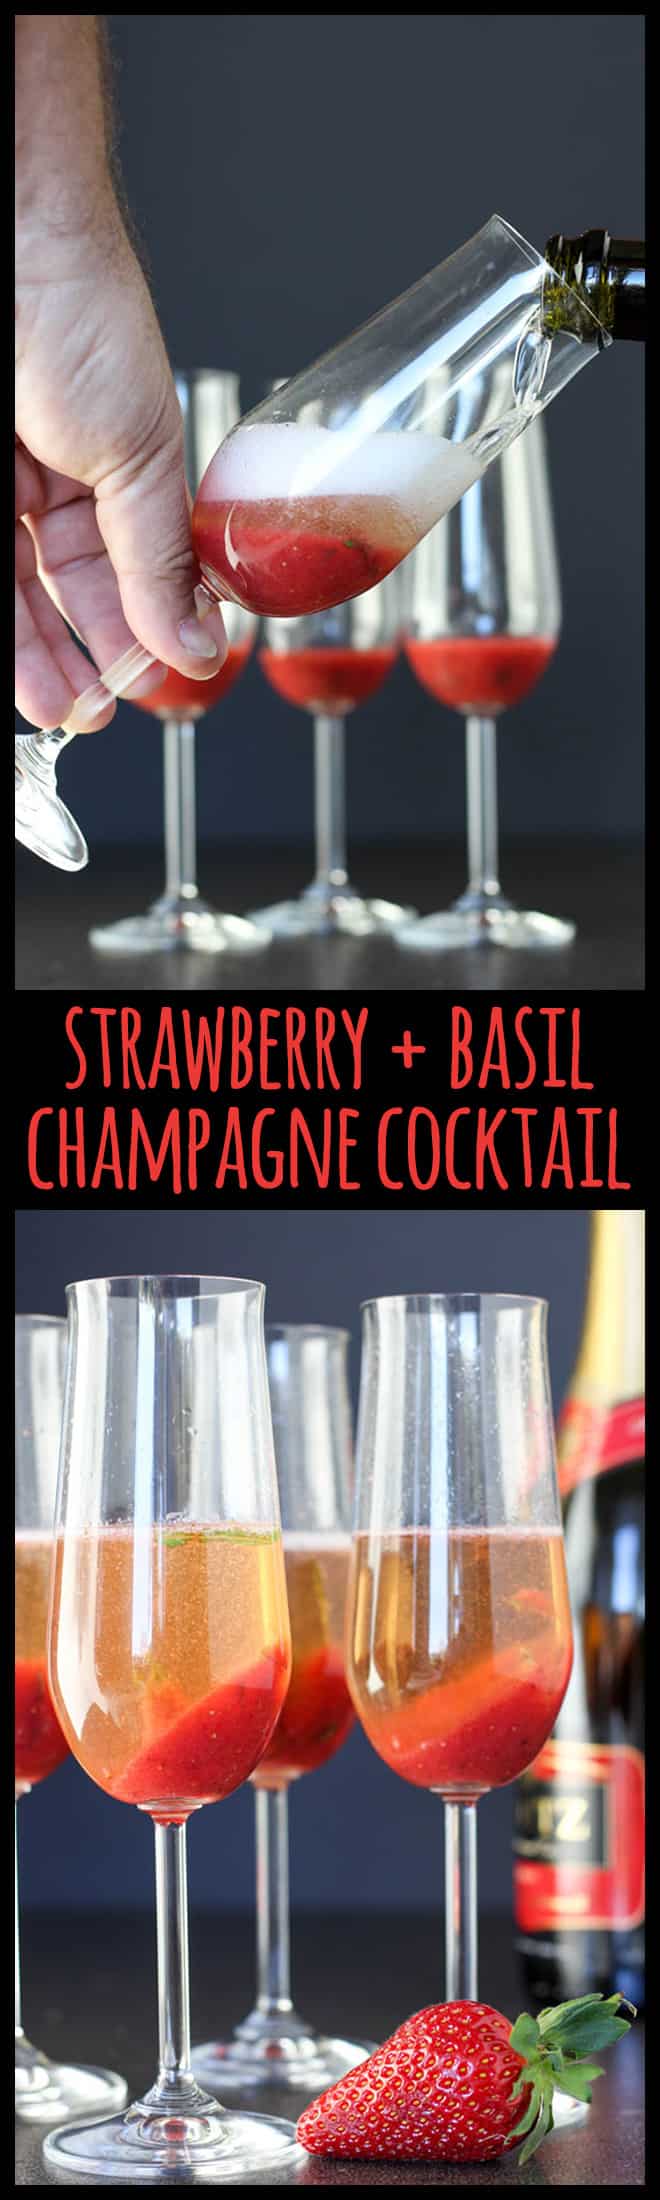 Strawberry and basil champagne cocktail. 